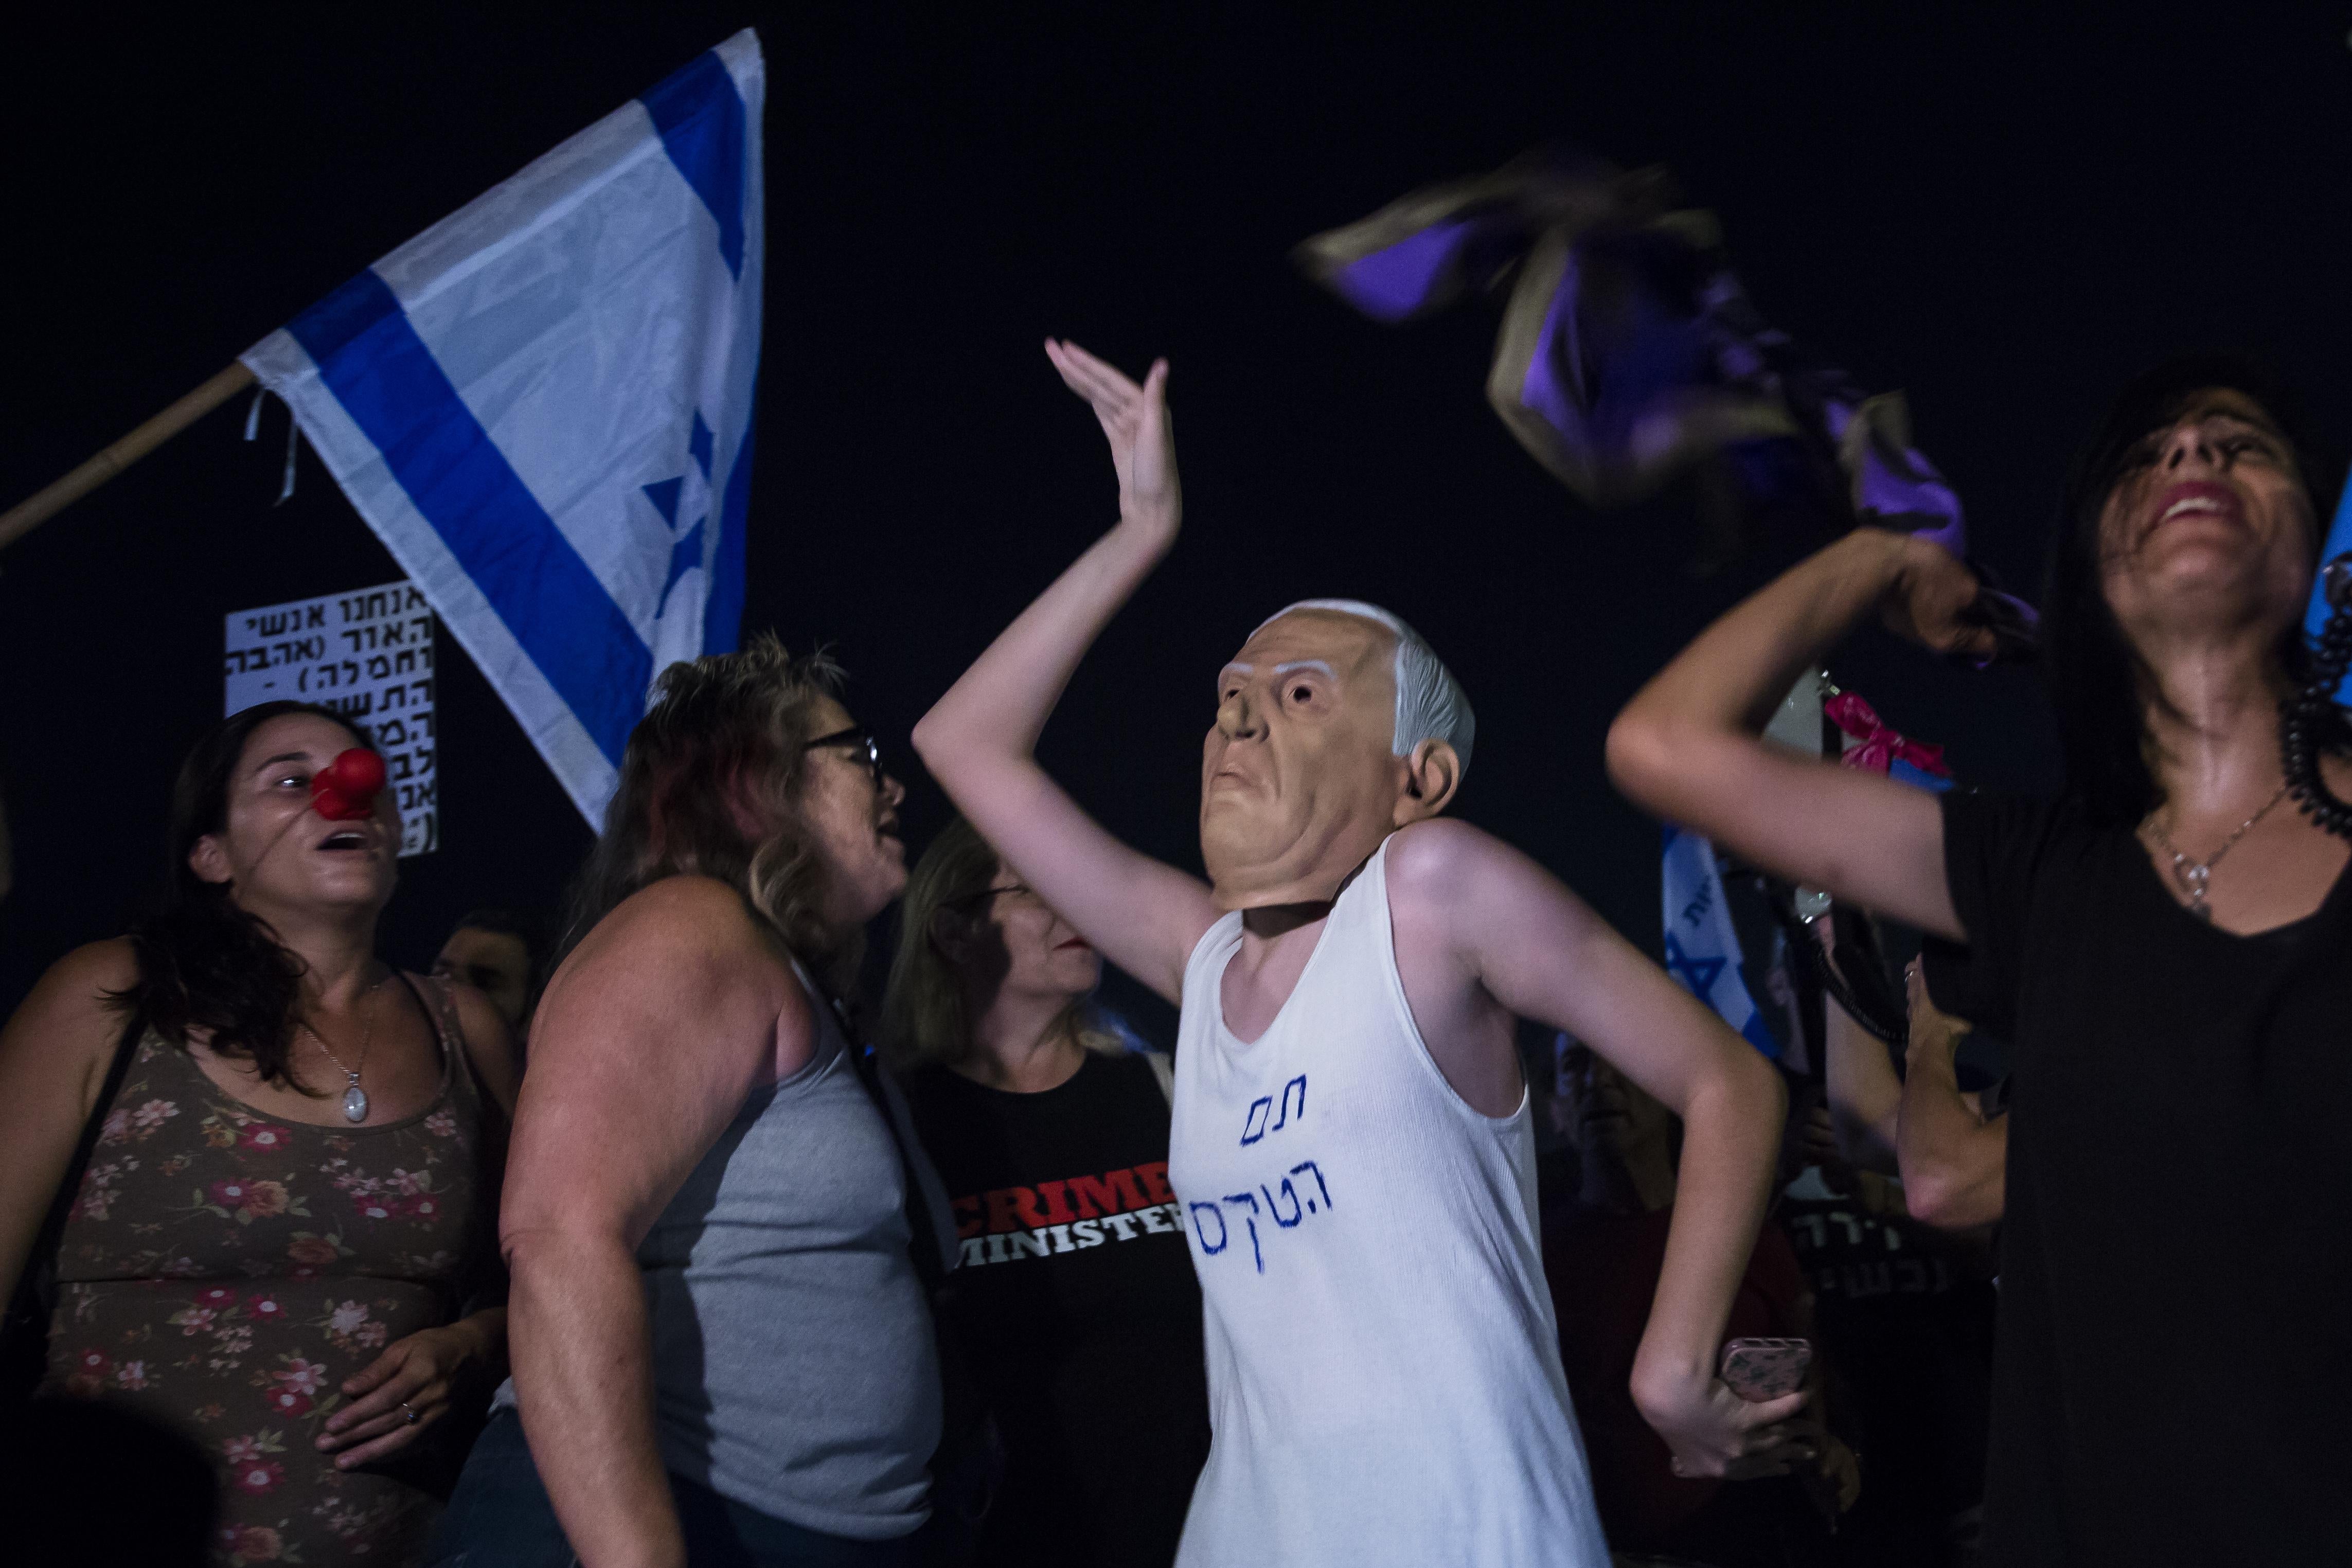 A young woman, wearing a rubber mask of Benjamin Netanyahu over her head, dances in a crowd of people.